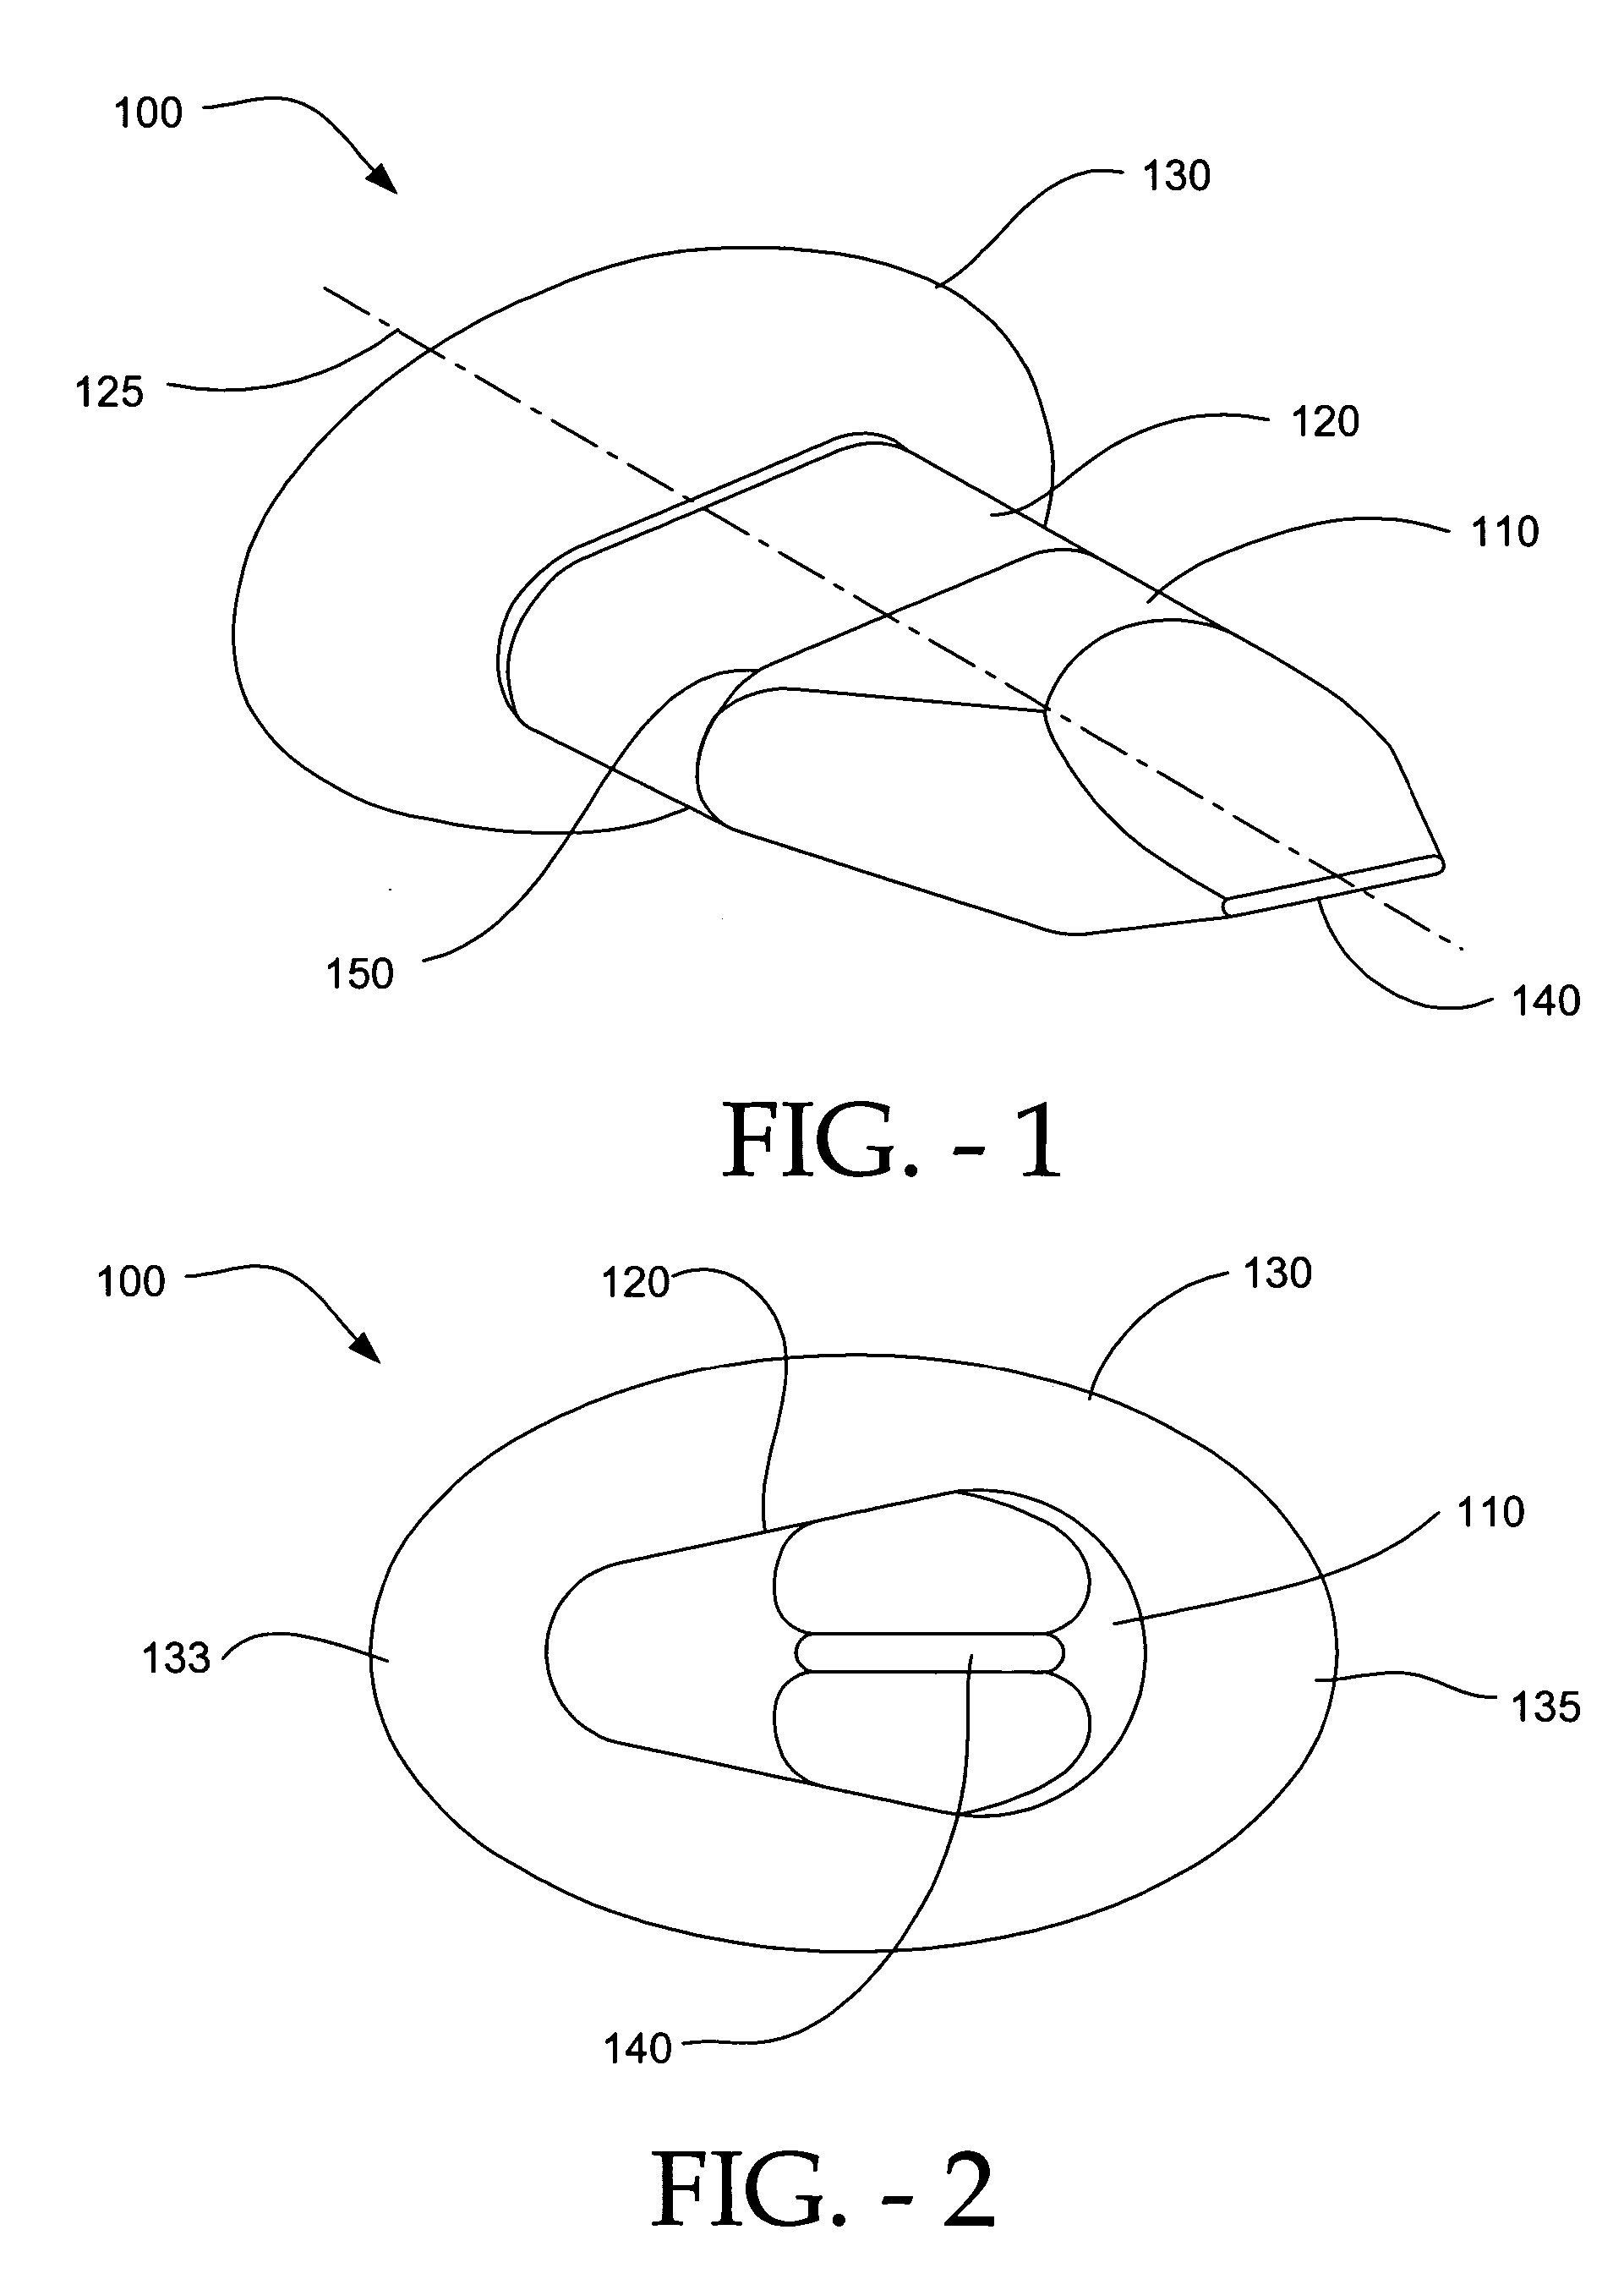 Distractible interspinous process implant and method of implantation